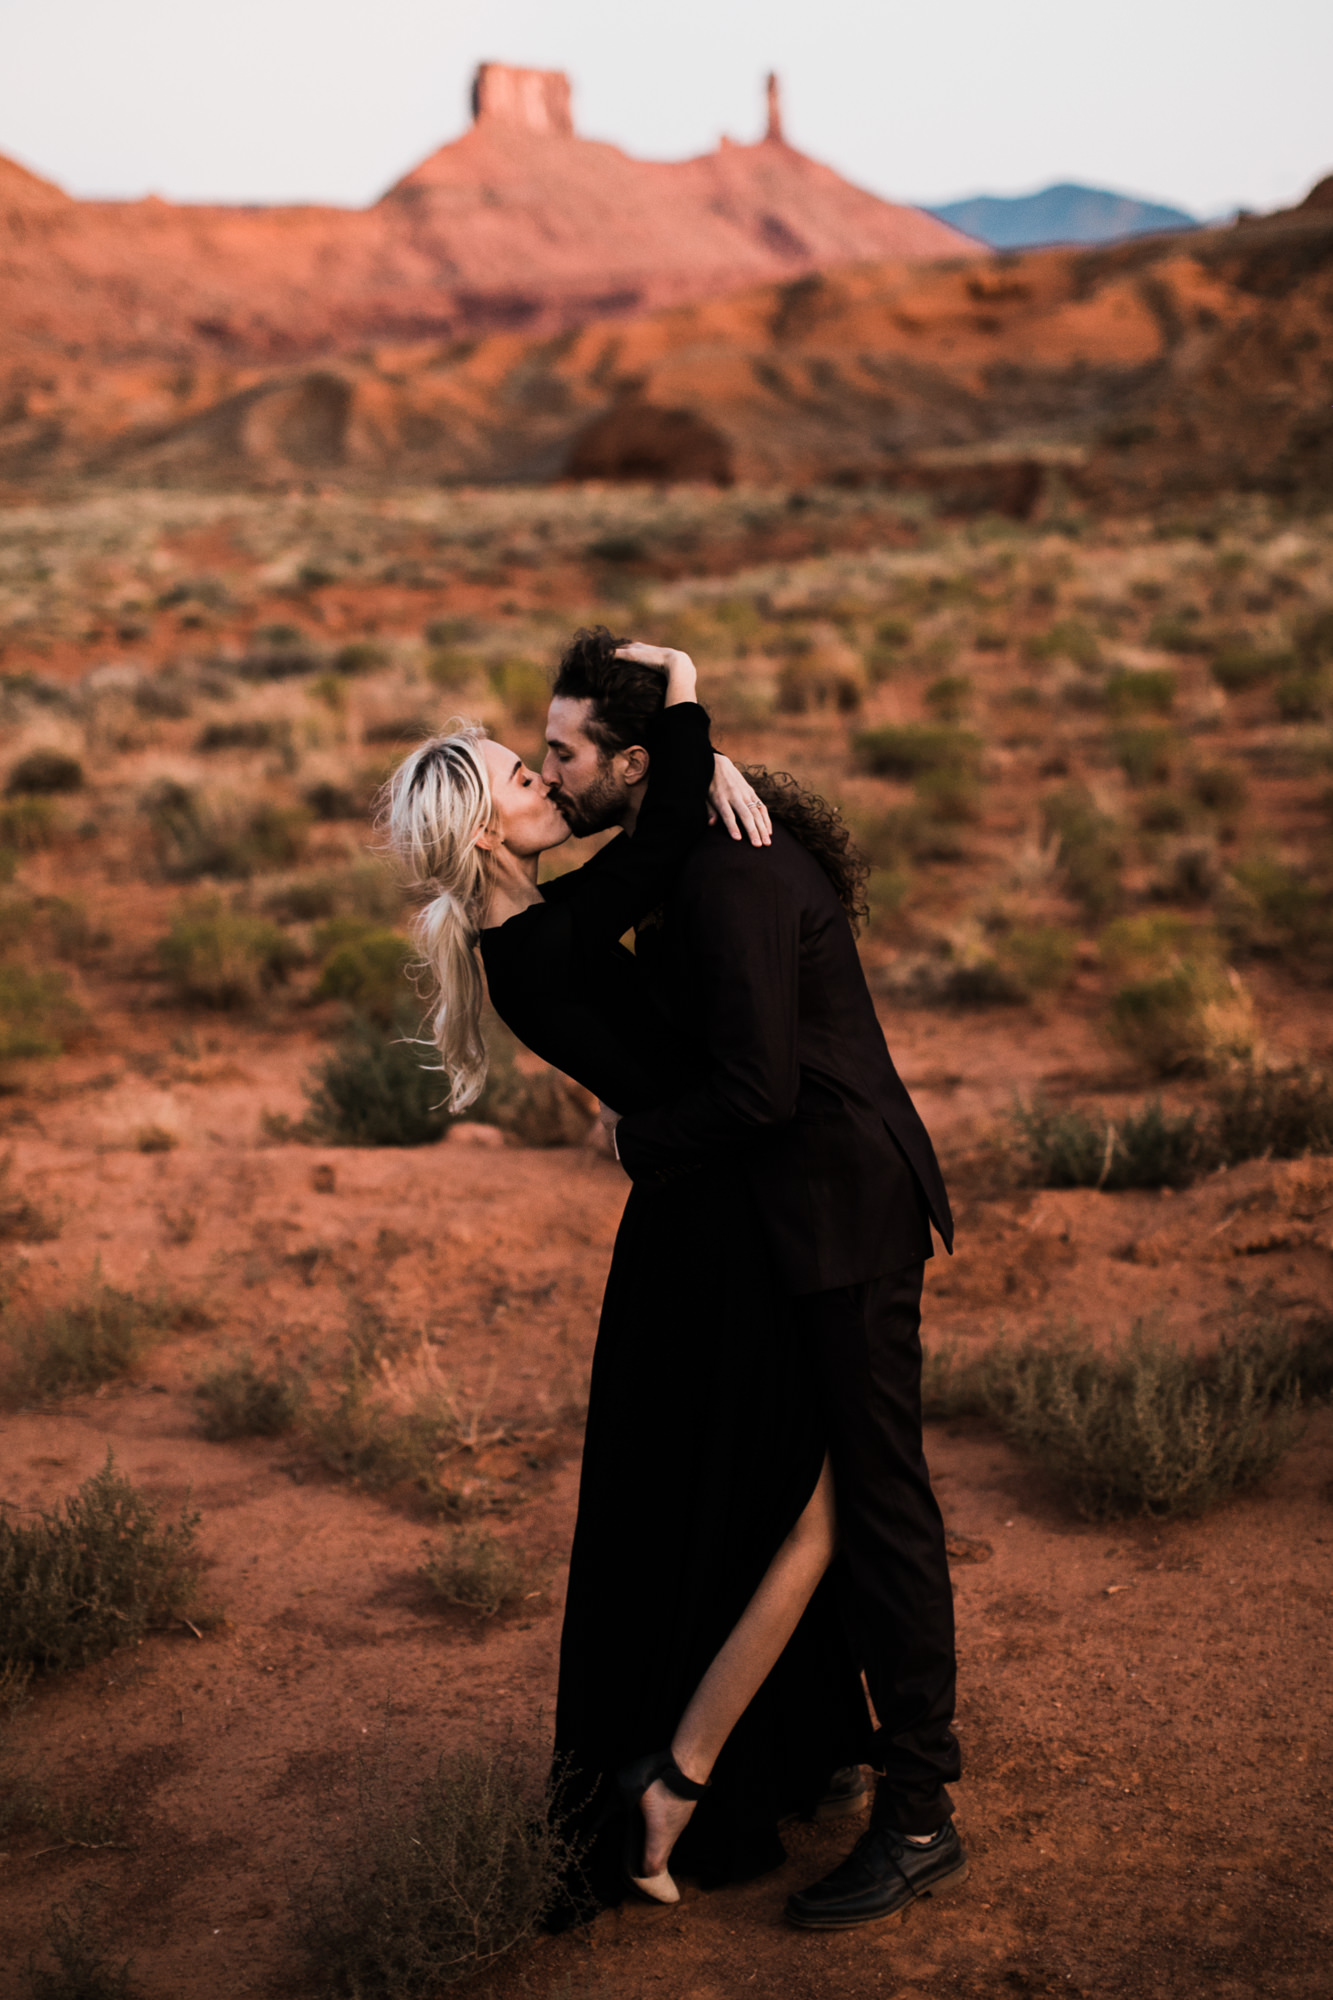 Moab desert elopement inspiration | moab, utah intimate wedding and elopement photographer | the hearnes adventure photography | www.thehearnes.com